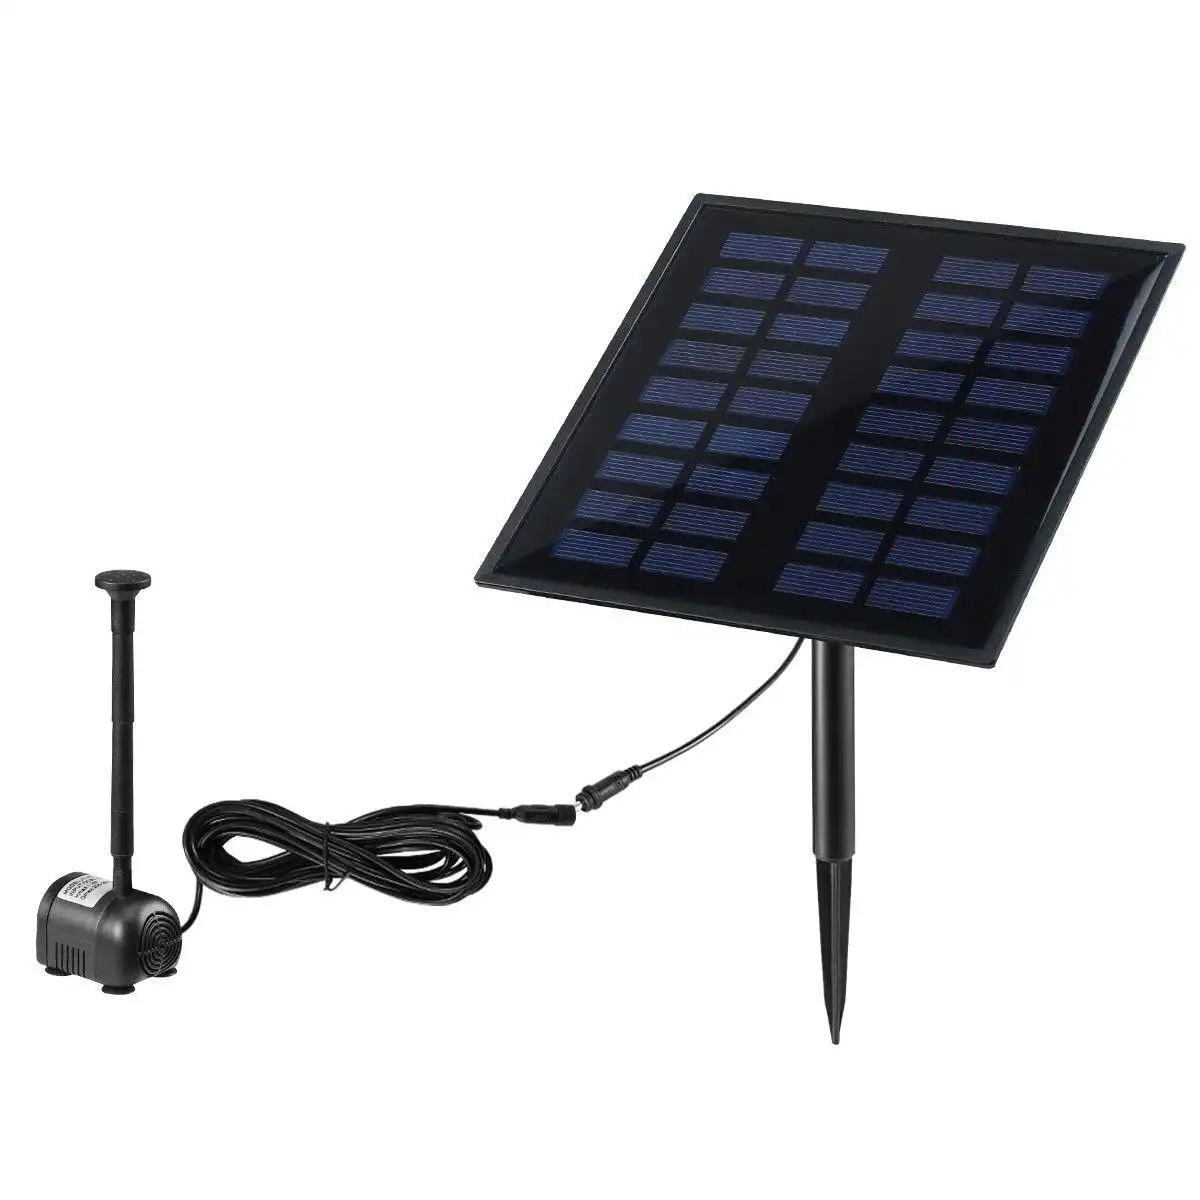 Ausway 5W Solar Powered Fountain Water Pump for Outdoor Garden Pond Pool